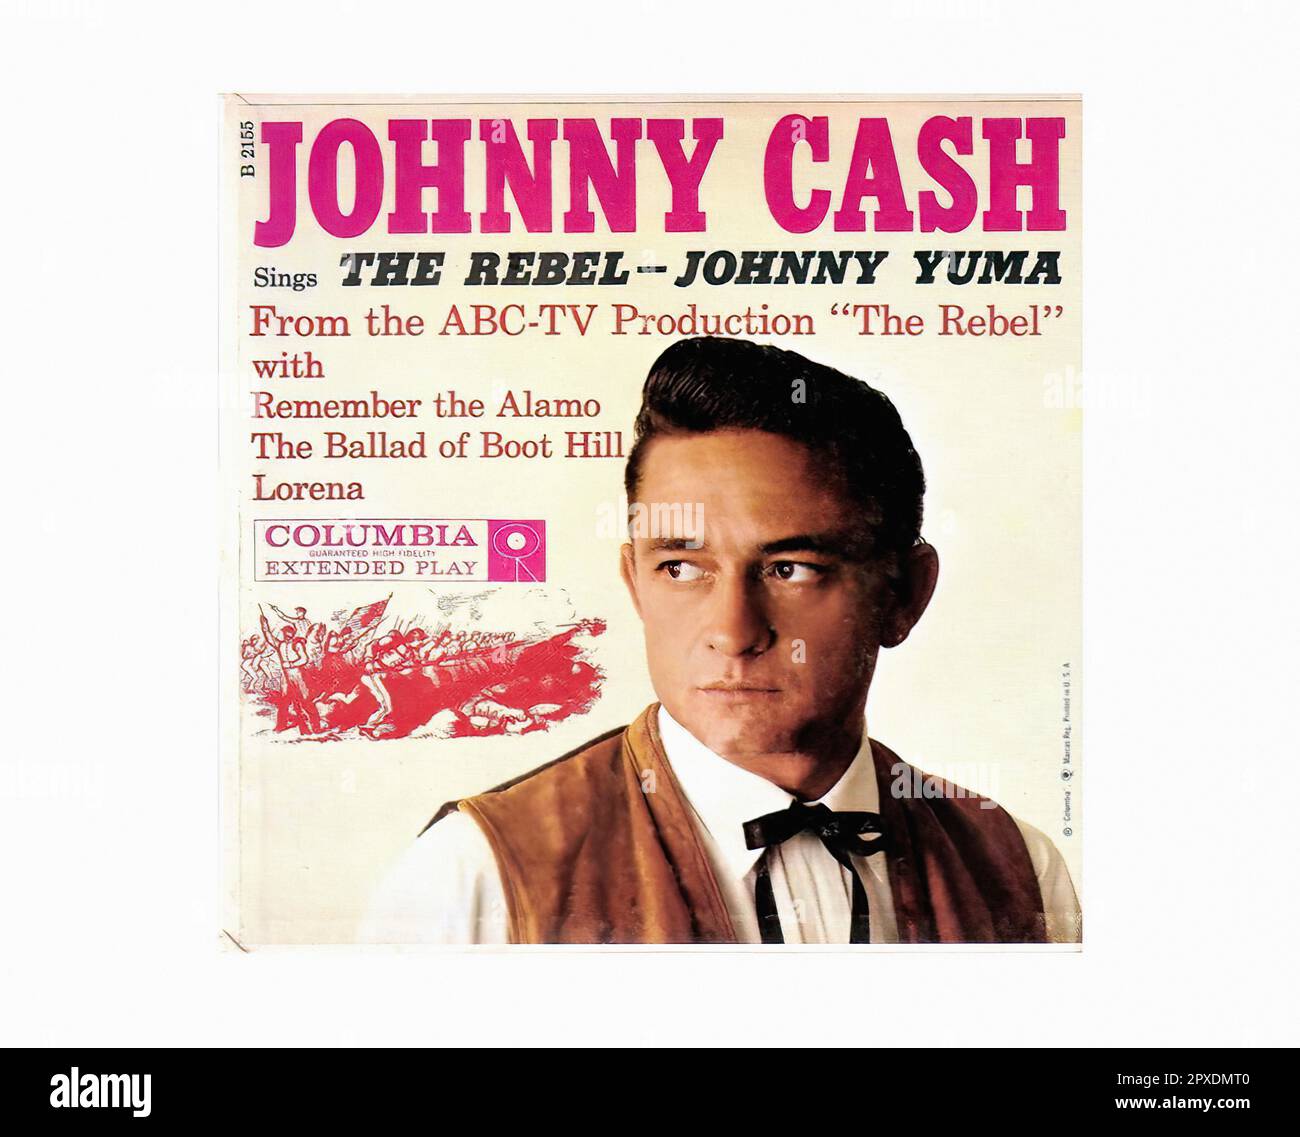 Johnny cash Cut Out Stock Images & Pictures - Alamy